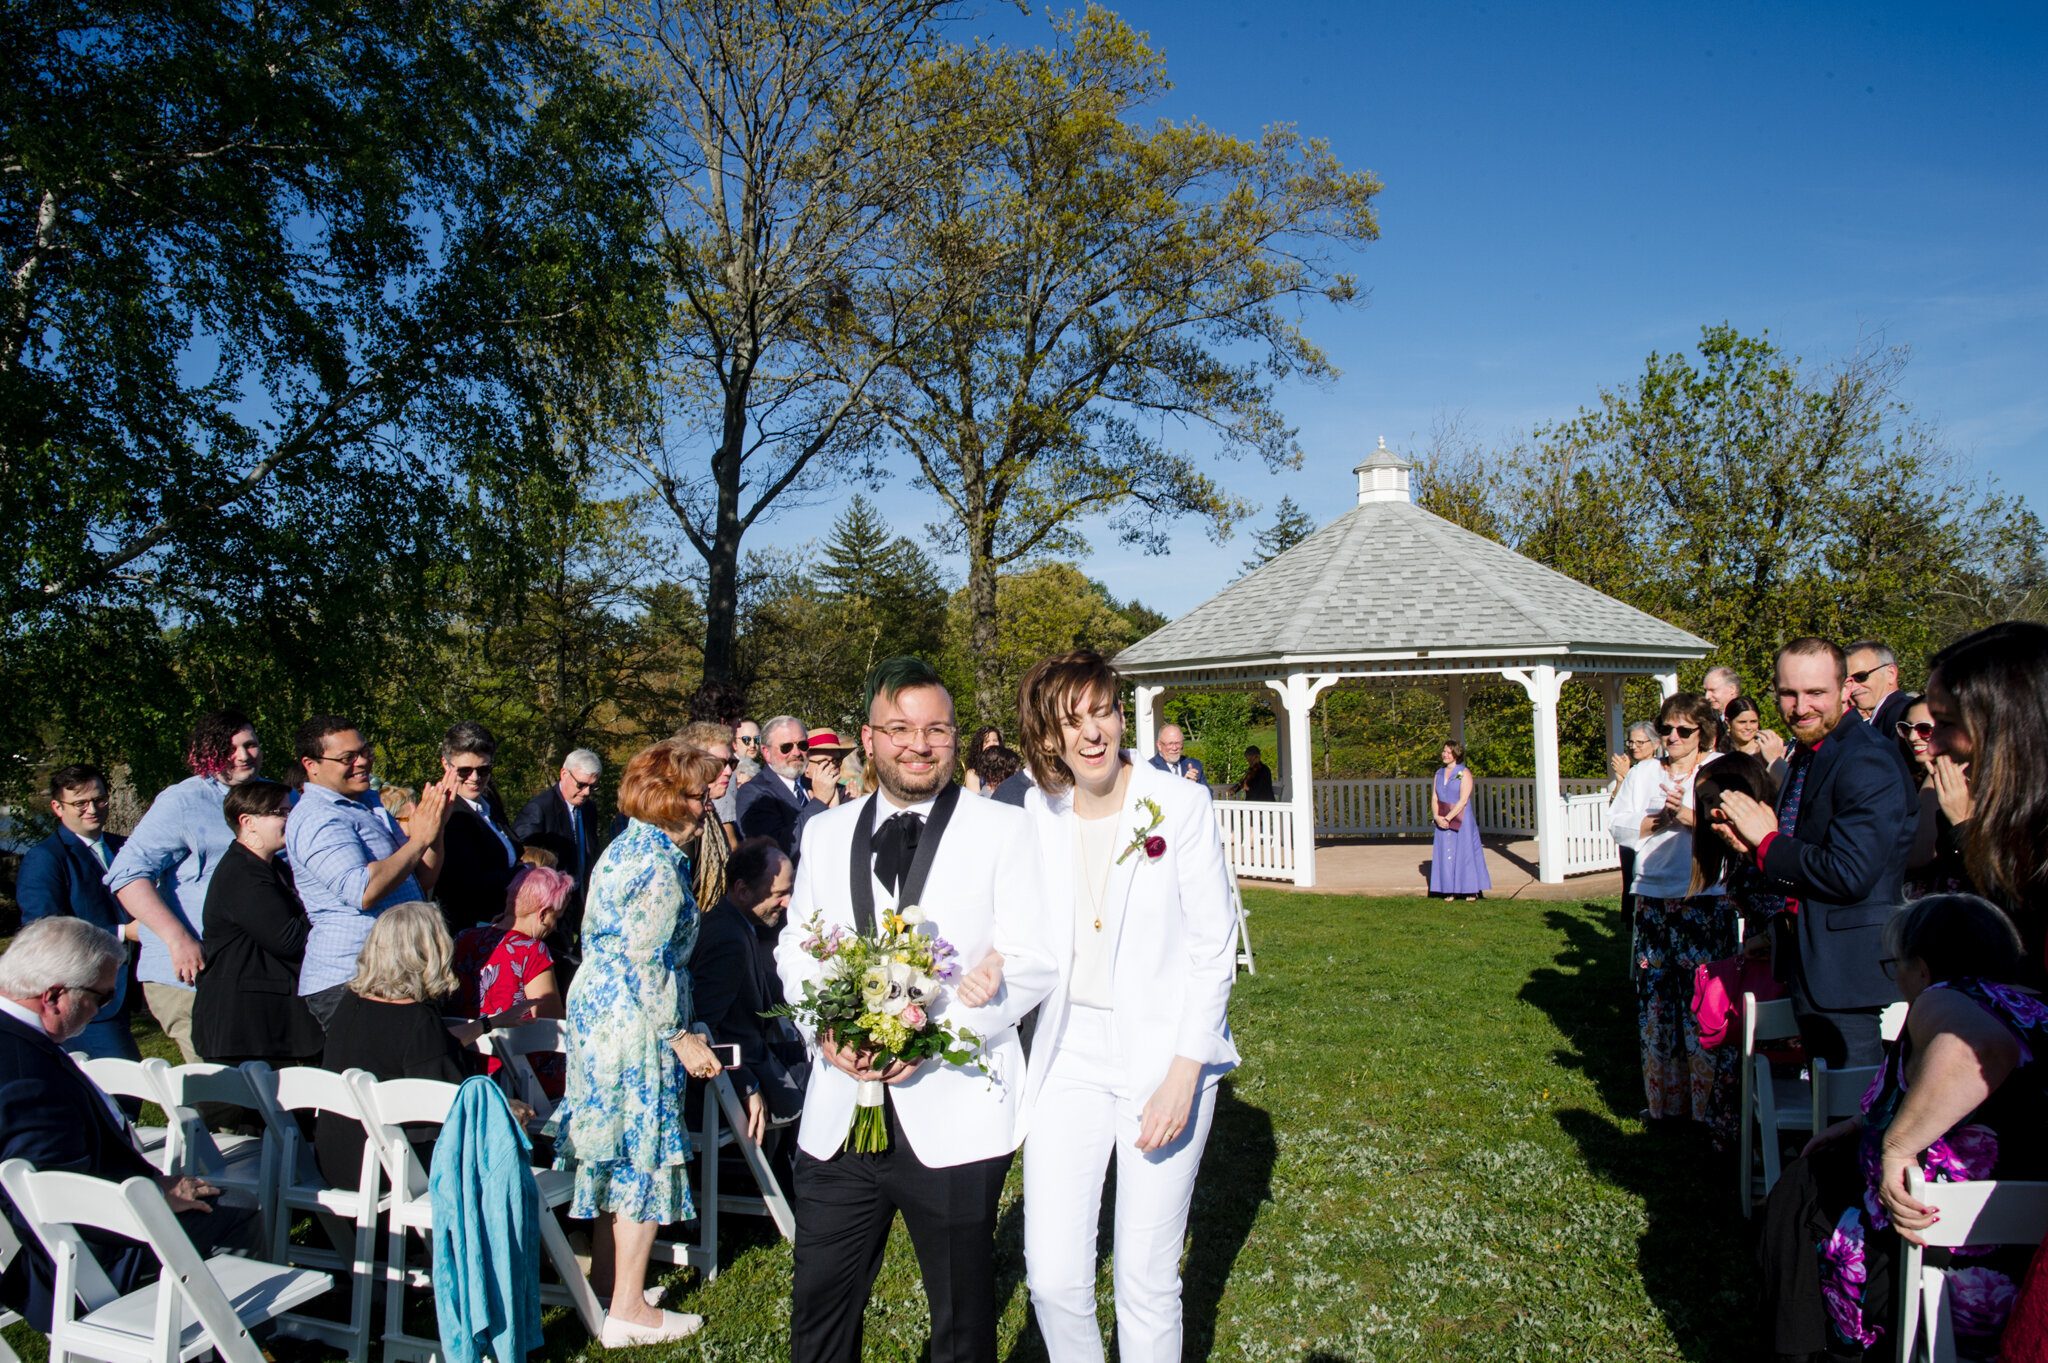 Newlyweds exit ceremony arm in arm at Roger Williams Botanical Center Providence Rhode Island Michelle Schapiro New England Couple Photographer